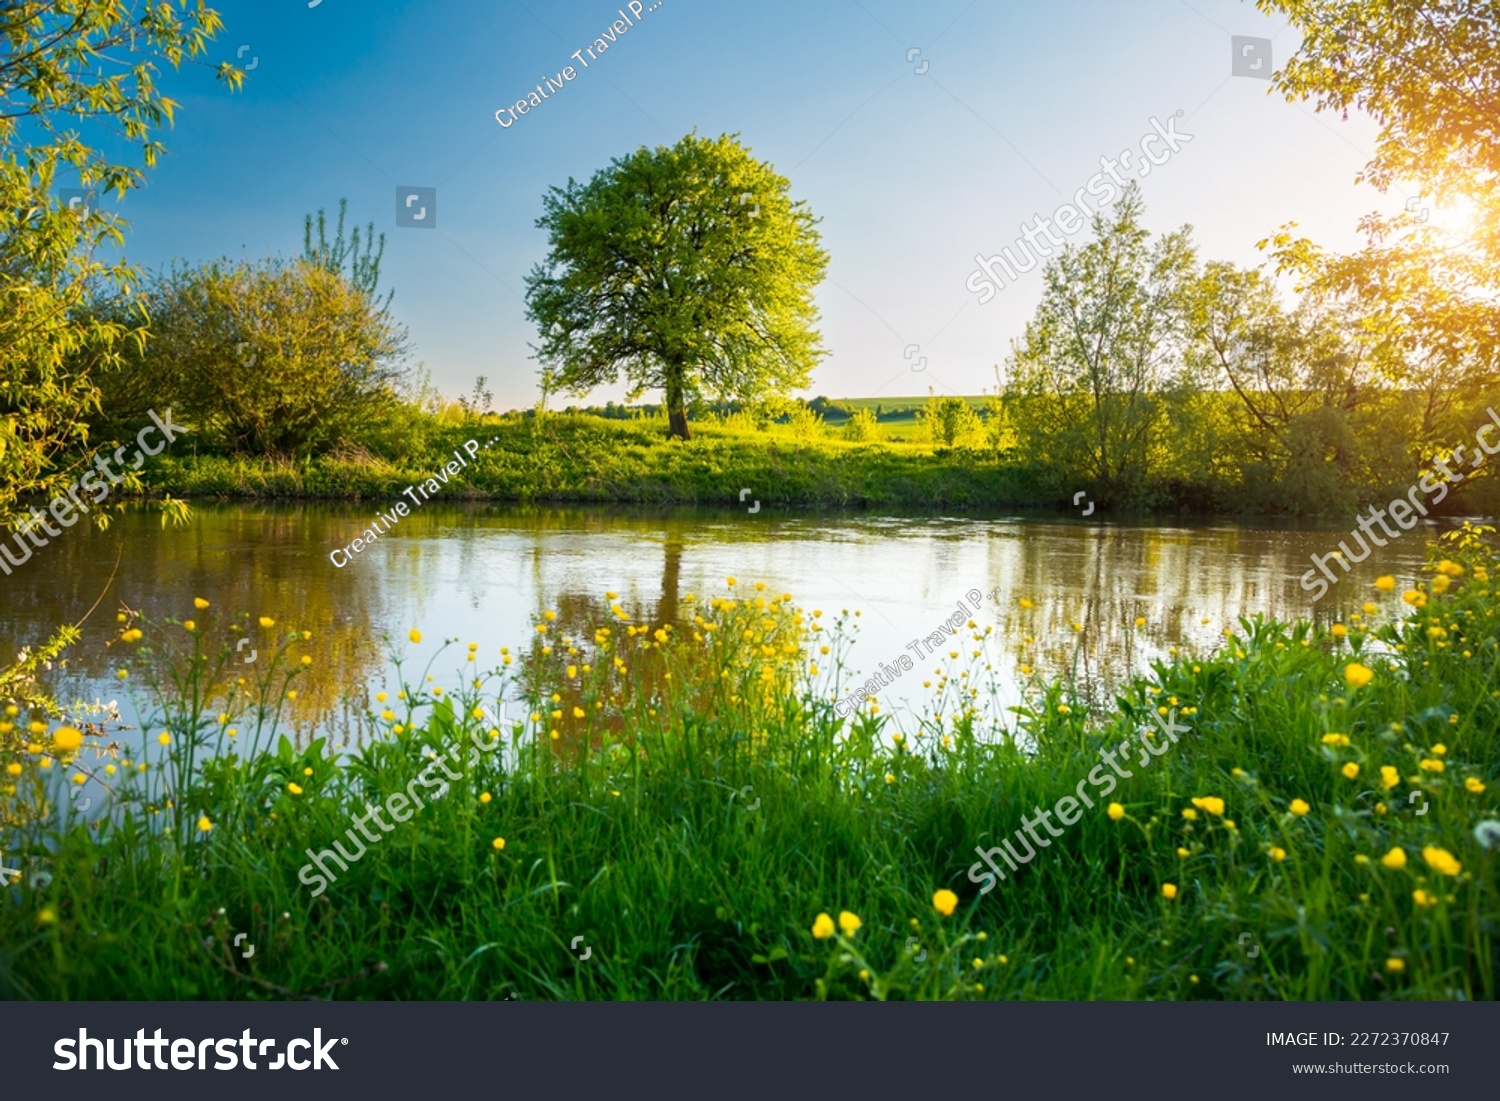 Perfect spring scene and morning meadow near the river with alone tree on the shore. Location place river Seret, Ukraine, Europe. Photo wallpaper. Environmental concept. Discover the beauty of earth. #2272370847